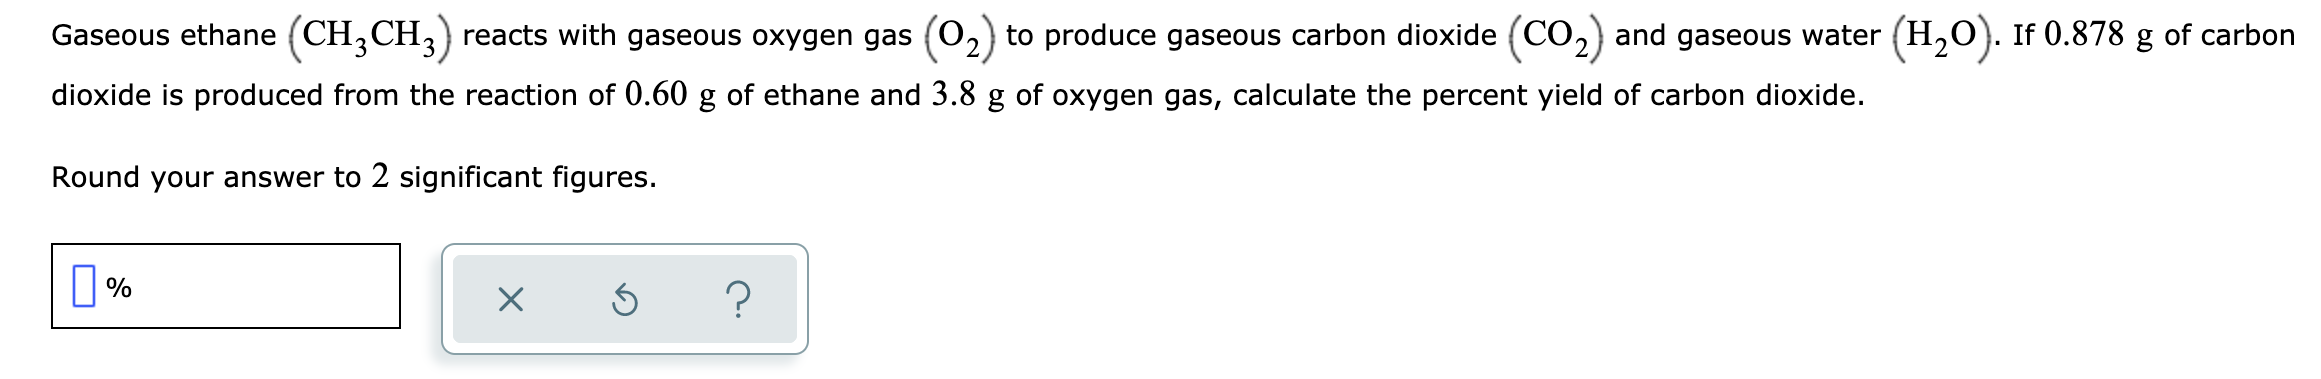 Gaseous ethane (CH,CH,) reacts with gaseous oxygen gas (02) to produce gaseous carbon dioxide (CO2) and gaseous water (H,O). If 0.878 g of carbon
dioxide is produced from the reaction of 0.60 g of ethane and 3.8 g of oxygen gas, calculate the percent yield of carbon dioxide.
Round your answer to 2 significant figures.
